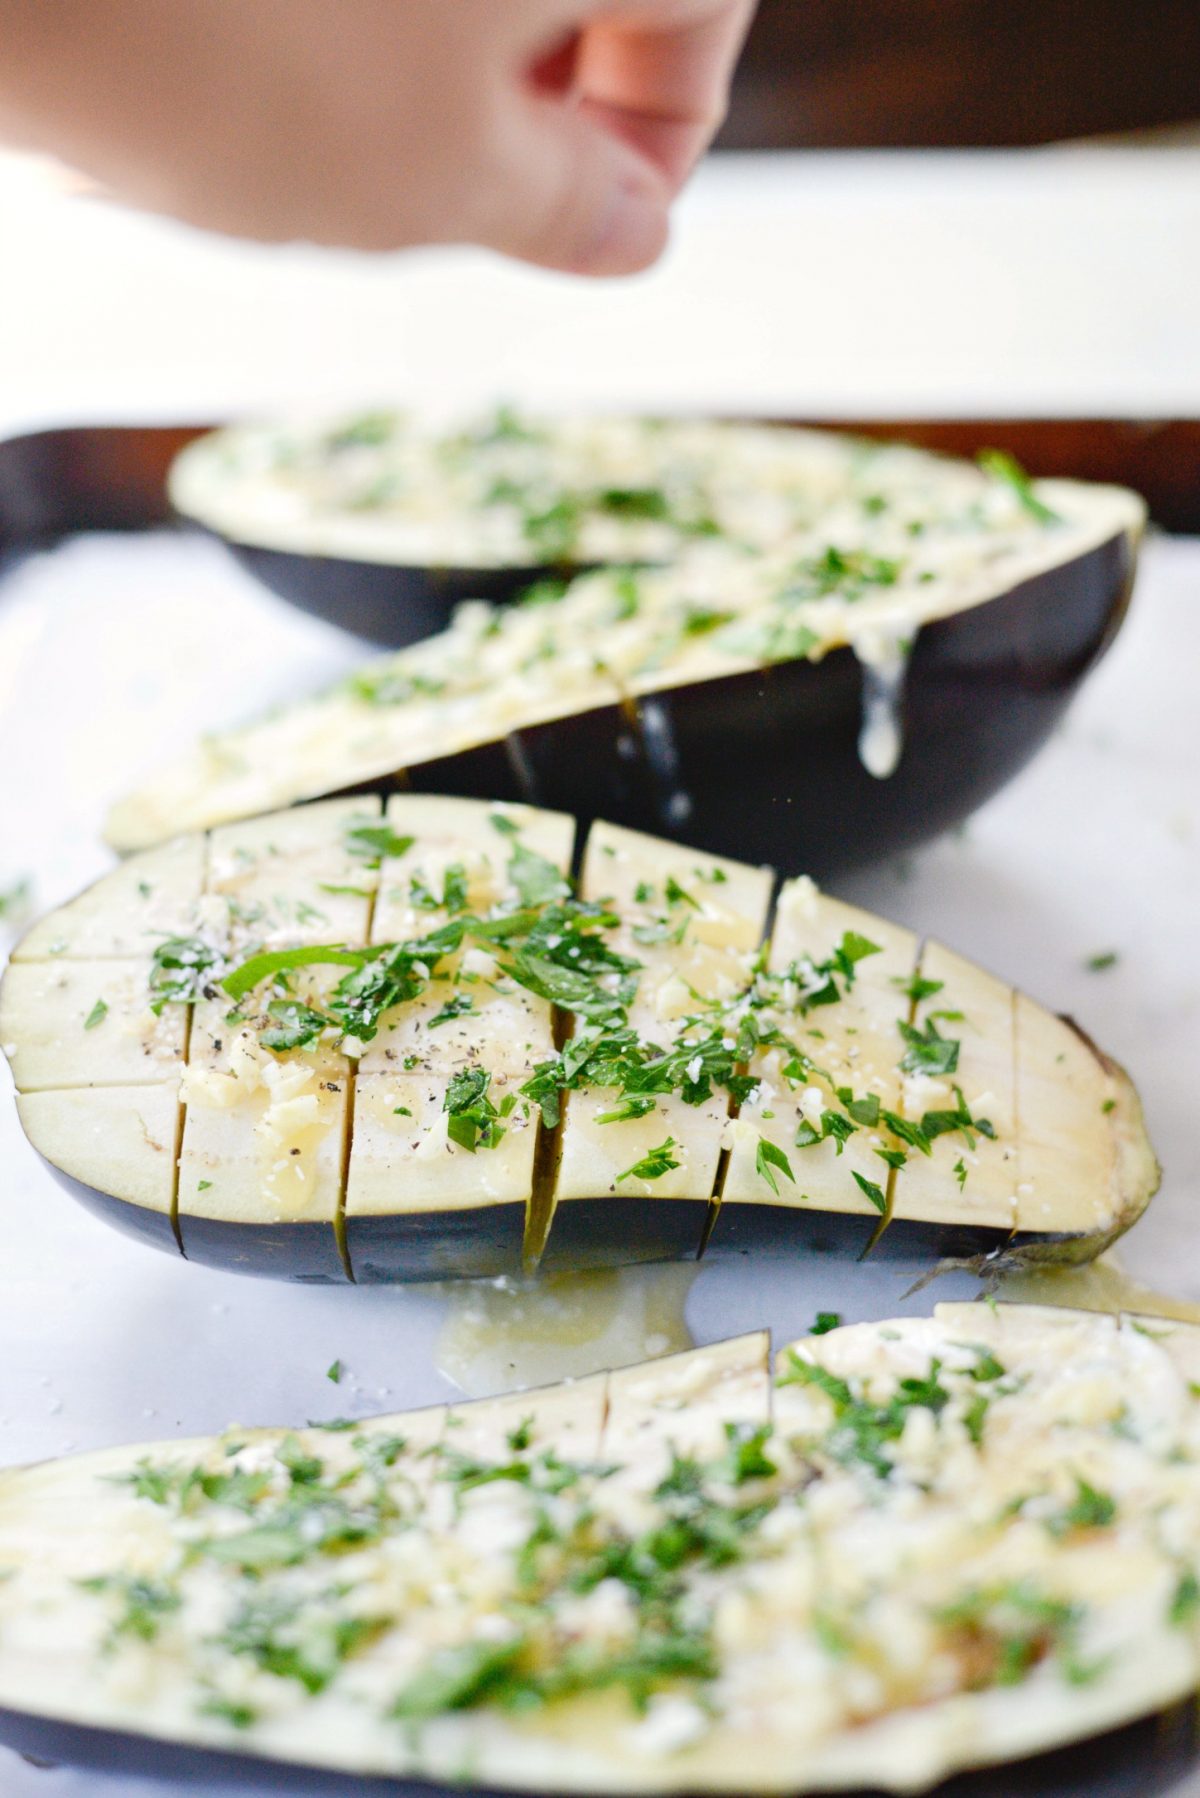 sprinkle eggplant with garlic and herbs